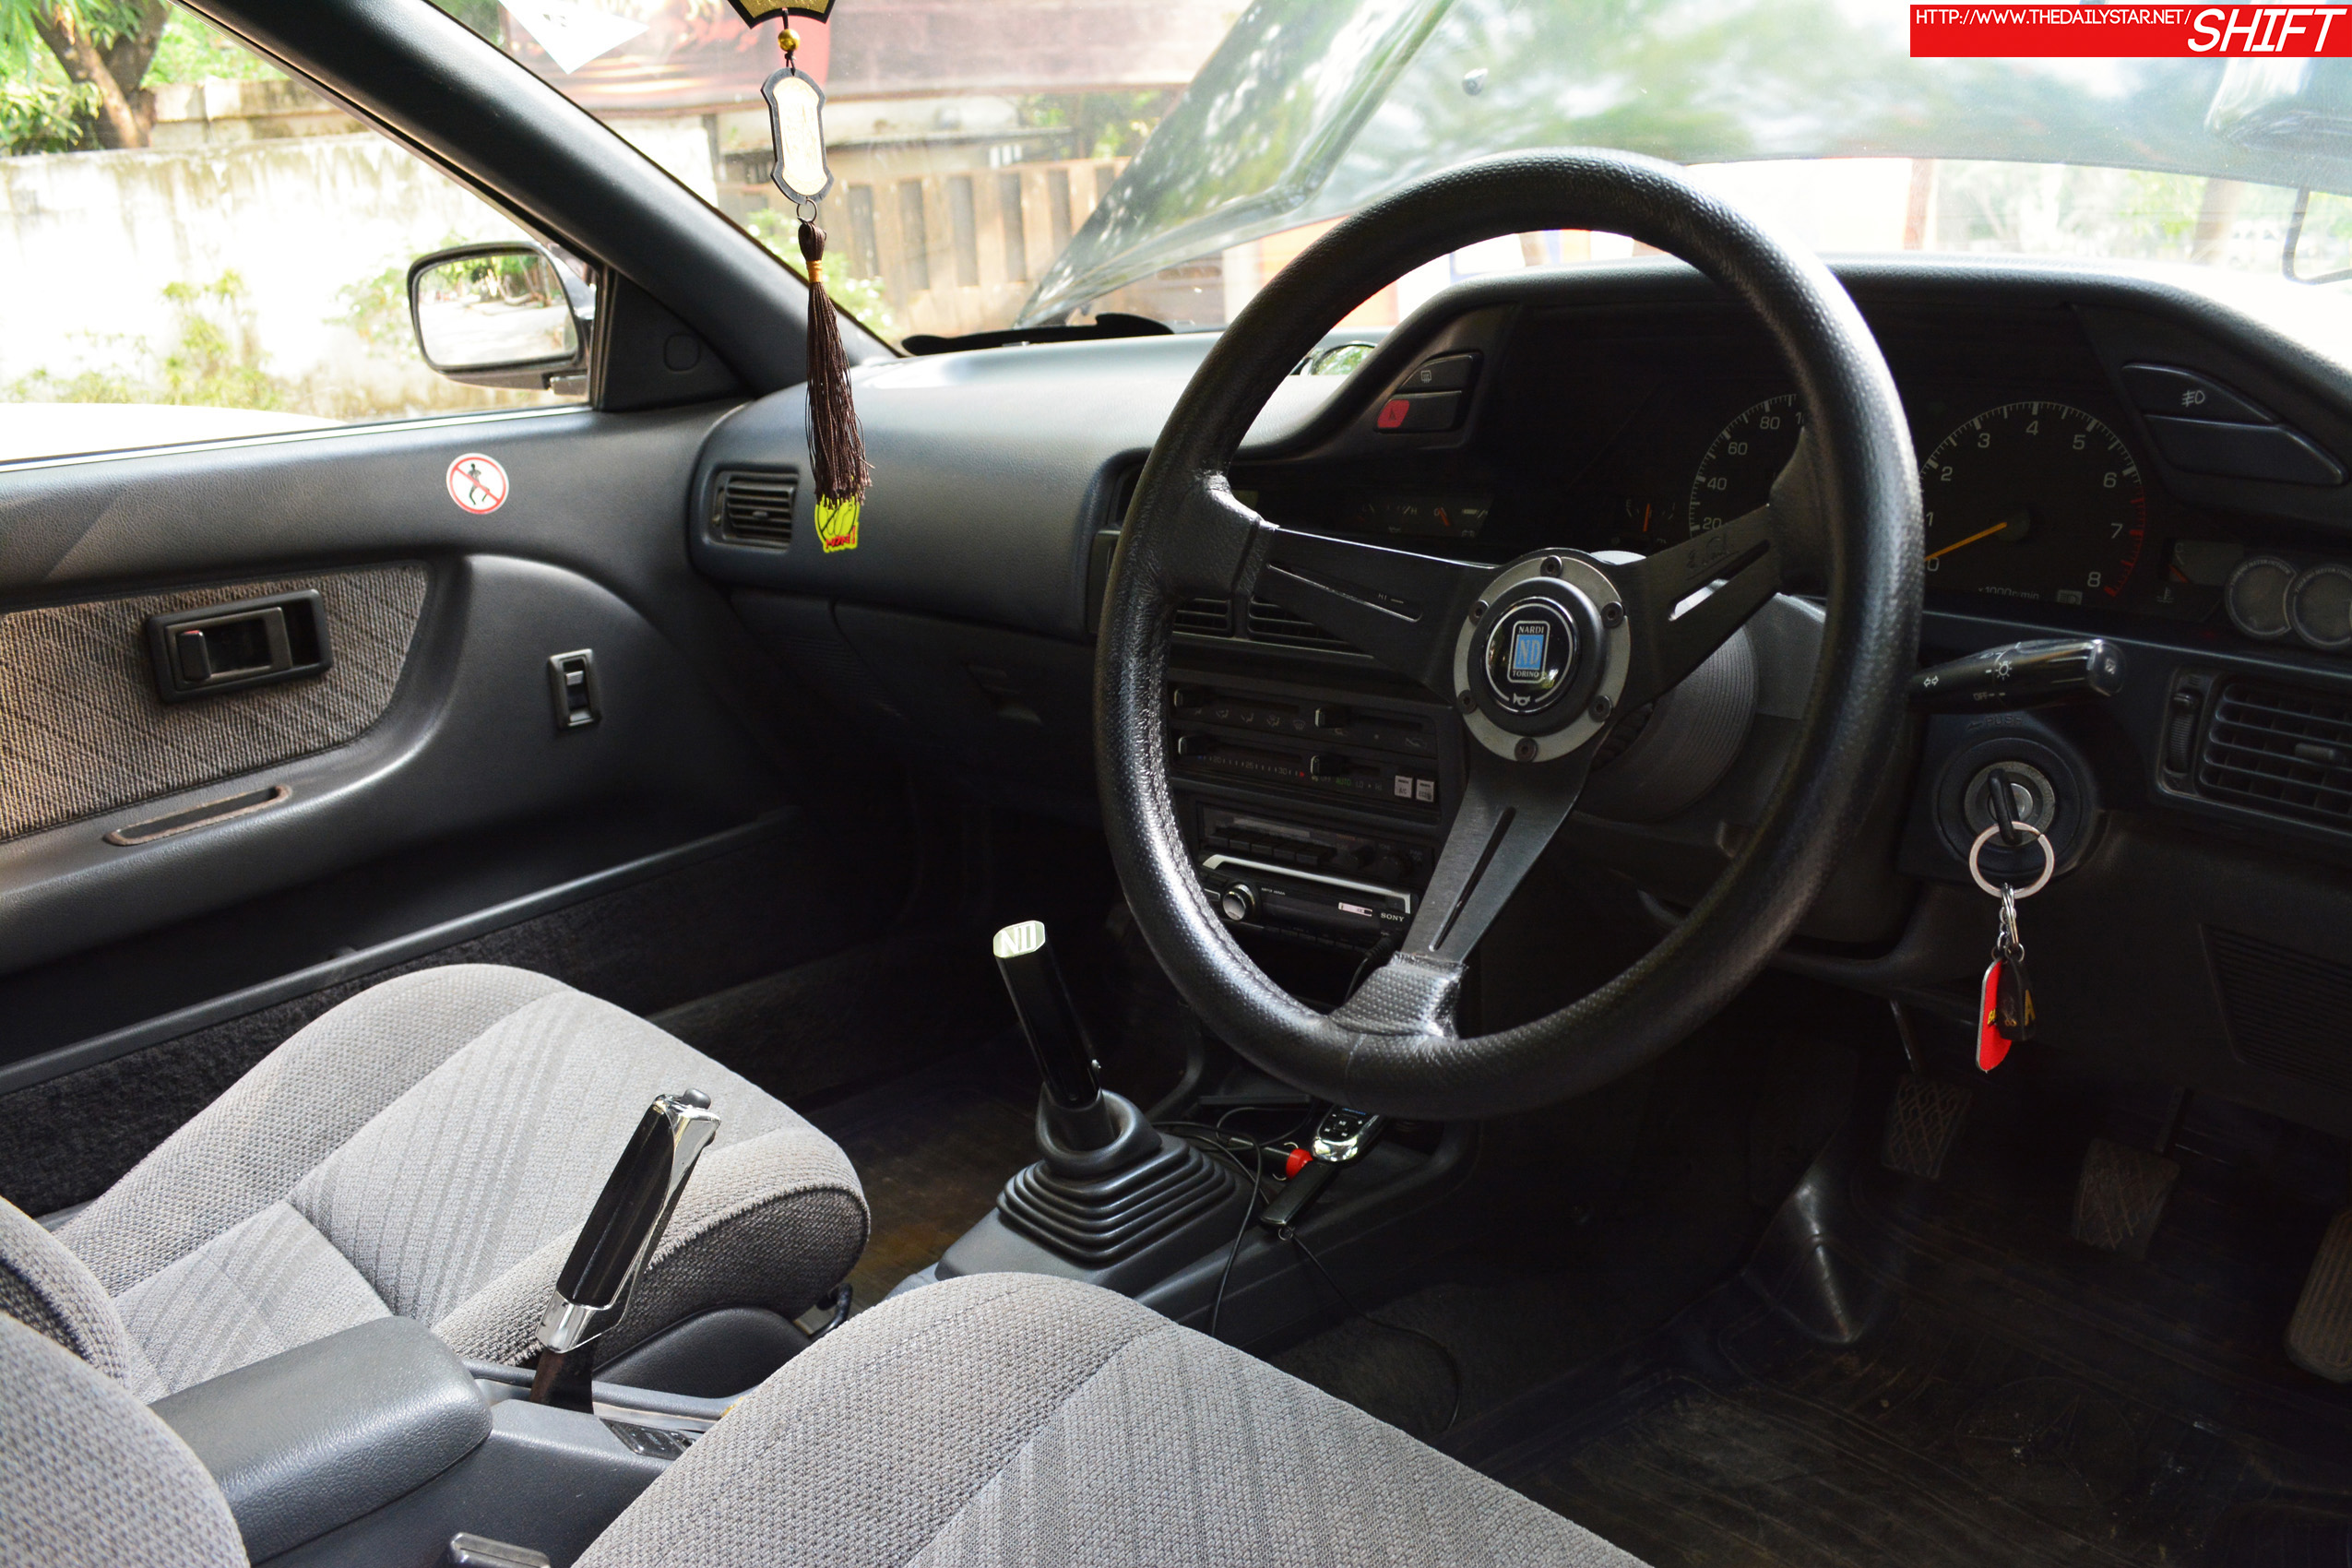 Possibly the cleanest Levin interior you will  see out there, complete with Nardi wheel and gear knob. Photo: Rahin Sadman Islam